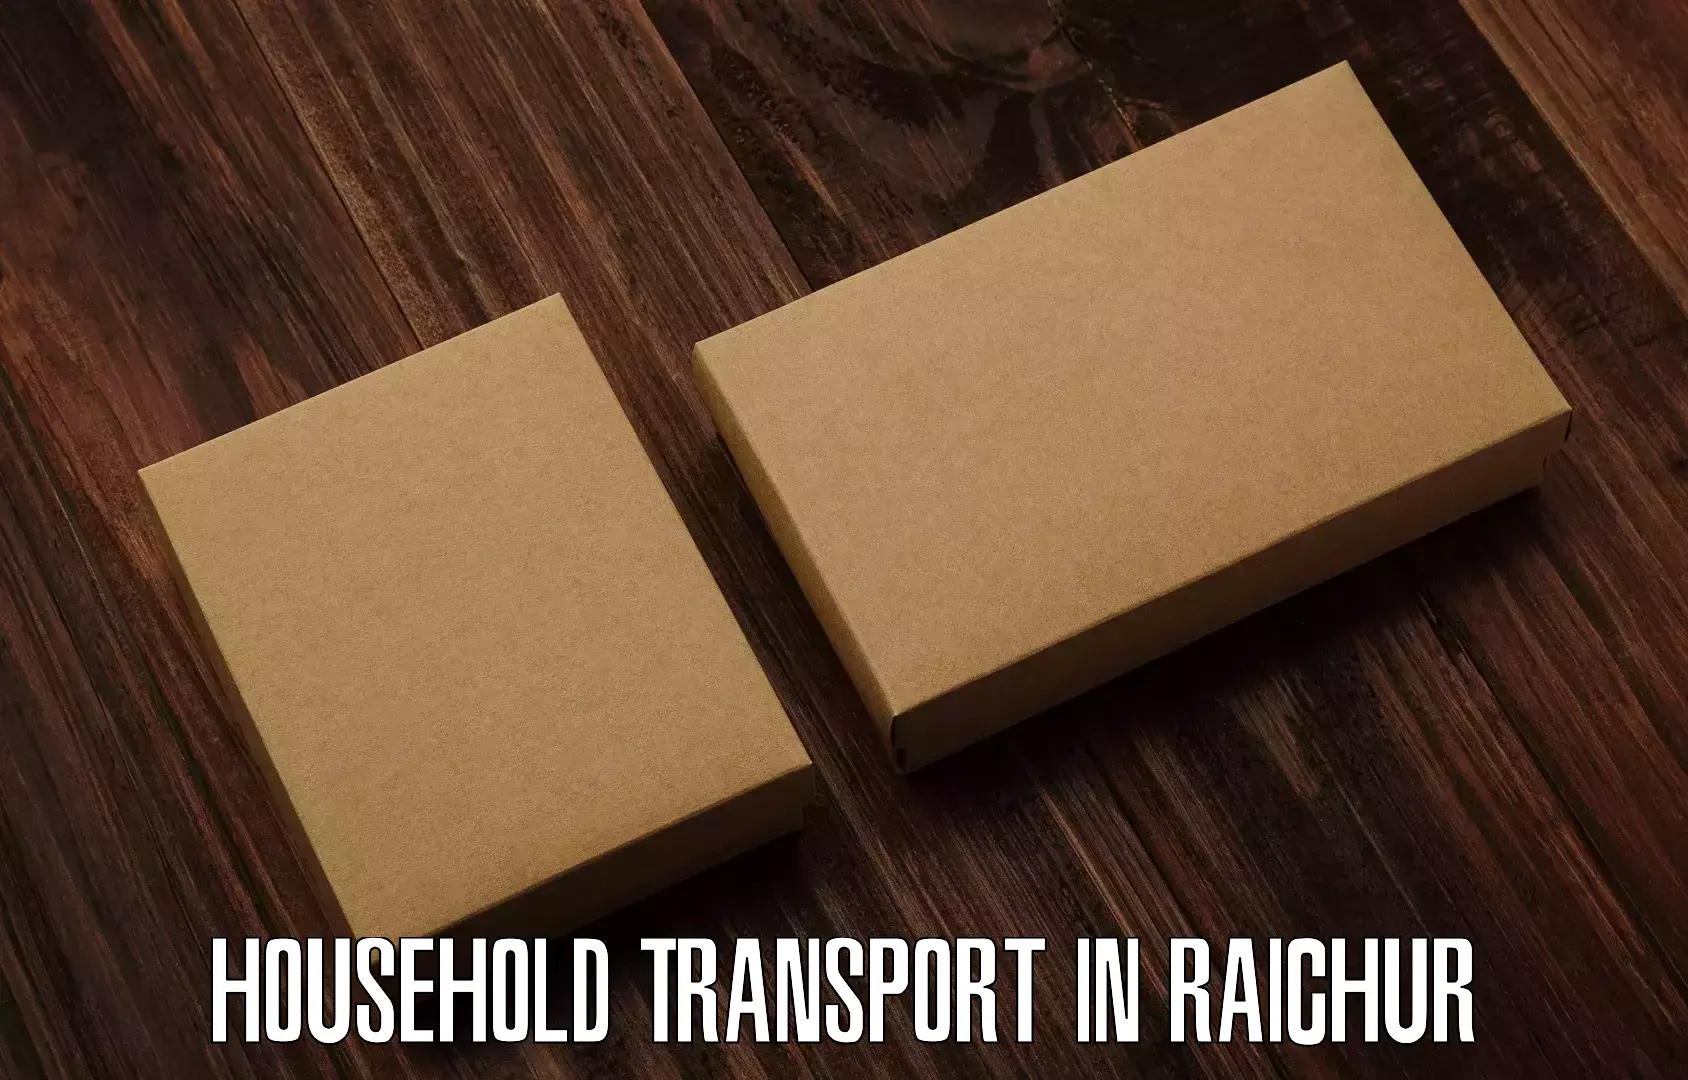 Professional packing and transport in Raichur